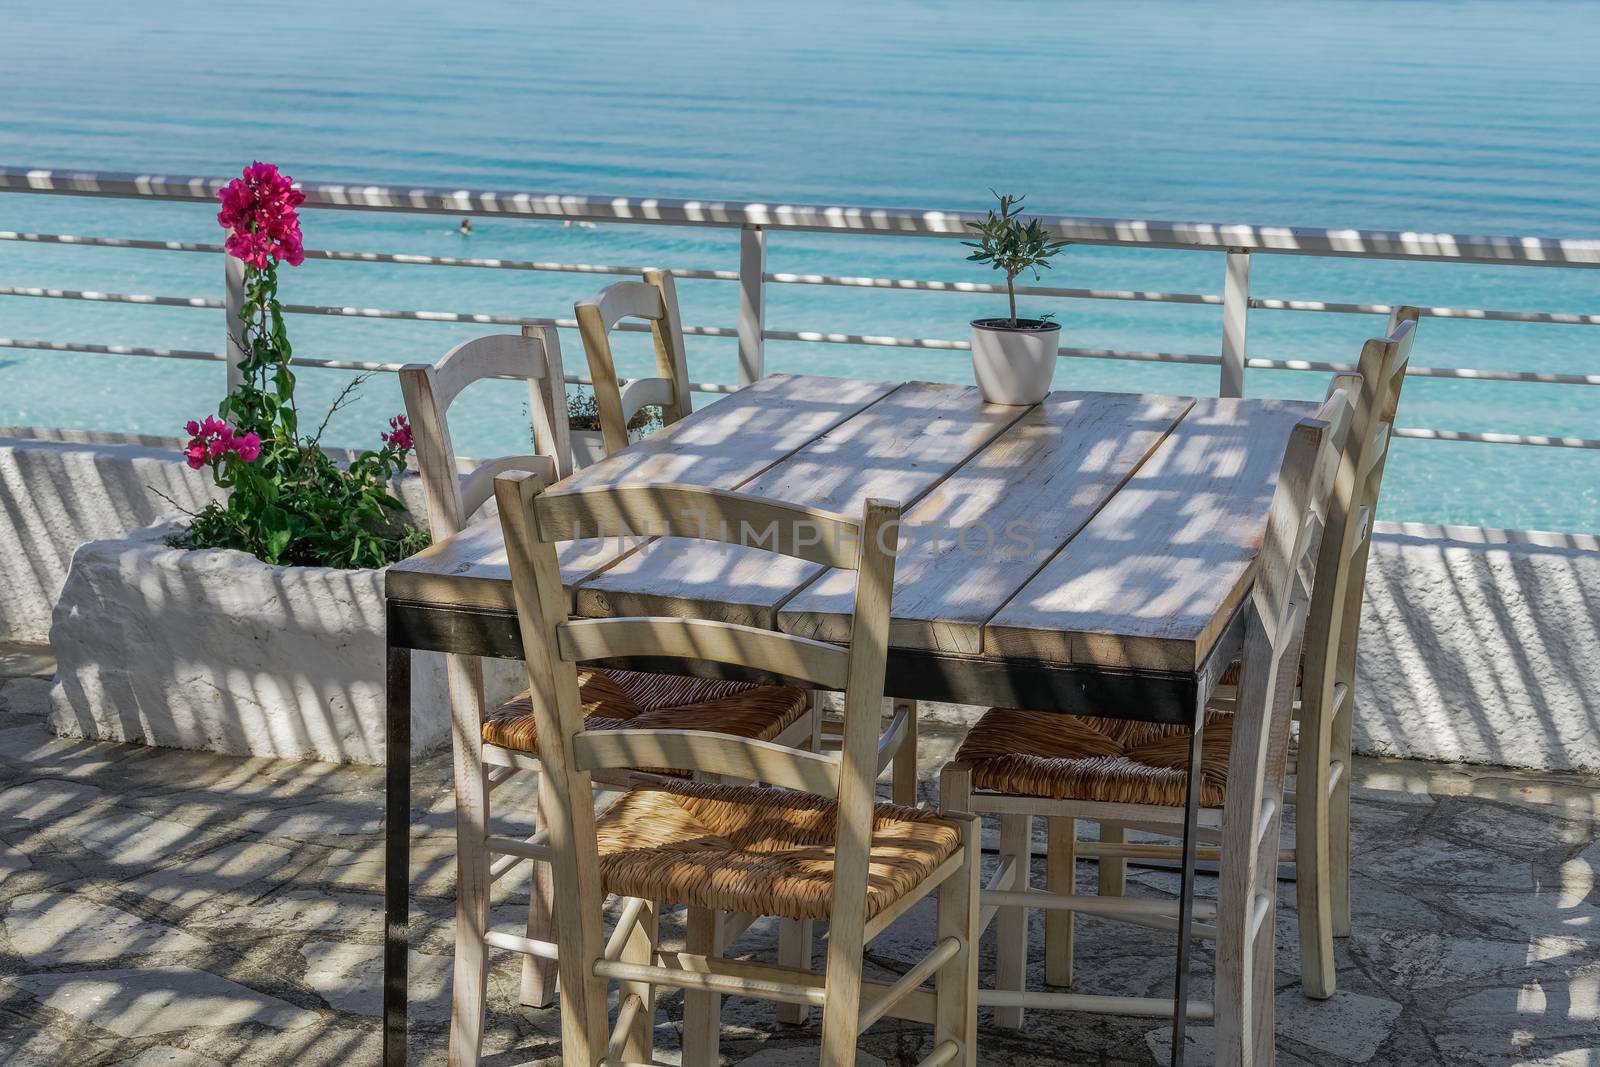 Restaurant outdoor seating area by the sea without customers in Kryopigi, Kassandra peninsula.